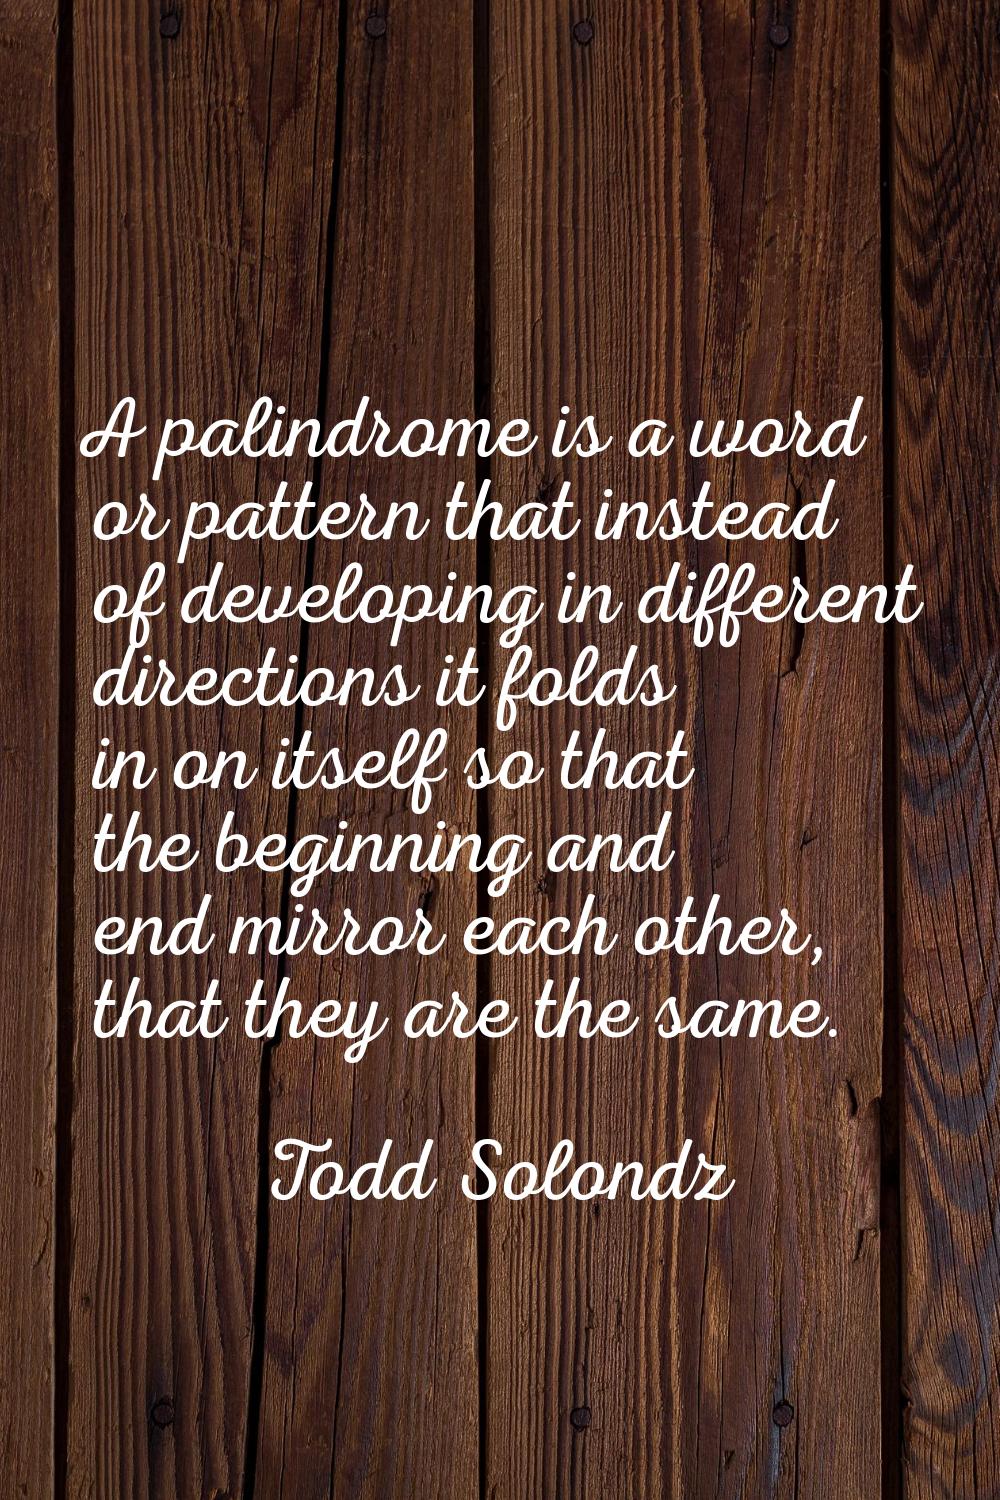 A palindrome is a word or pattern that instead of developing in different directions it folds in on